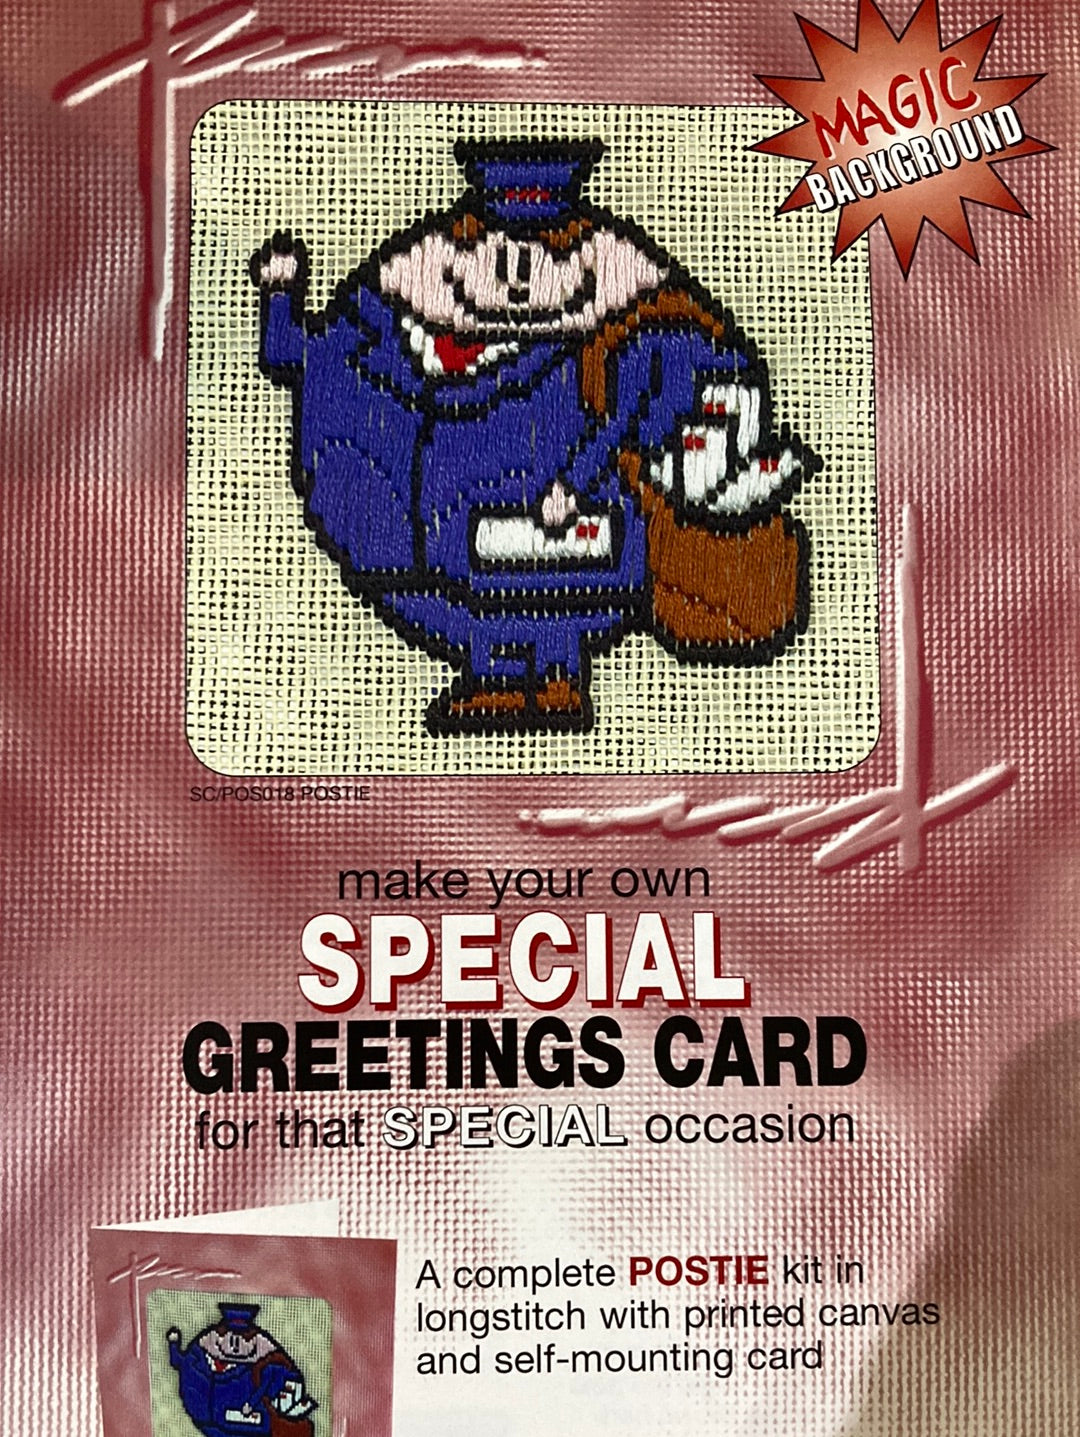 Make your own Special Greetings Card - various longstitch card kits